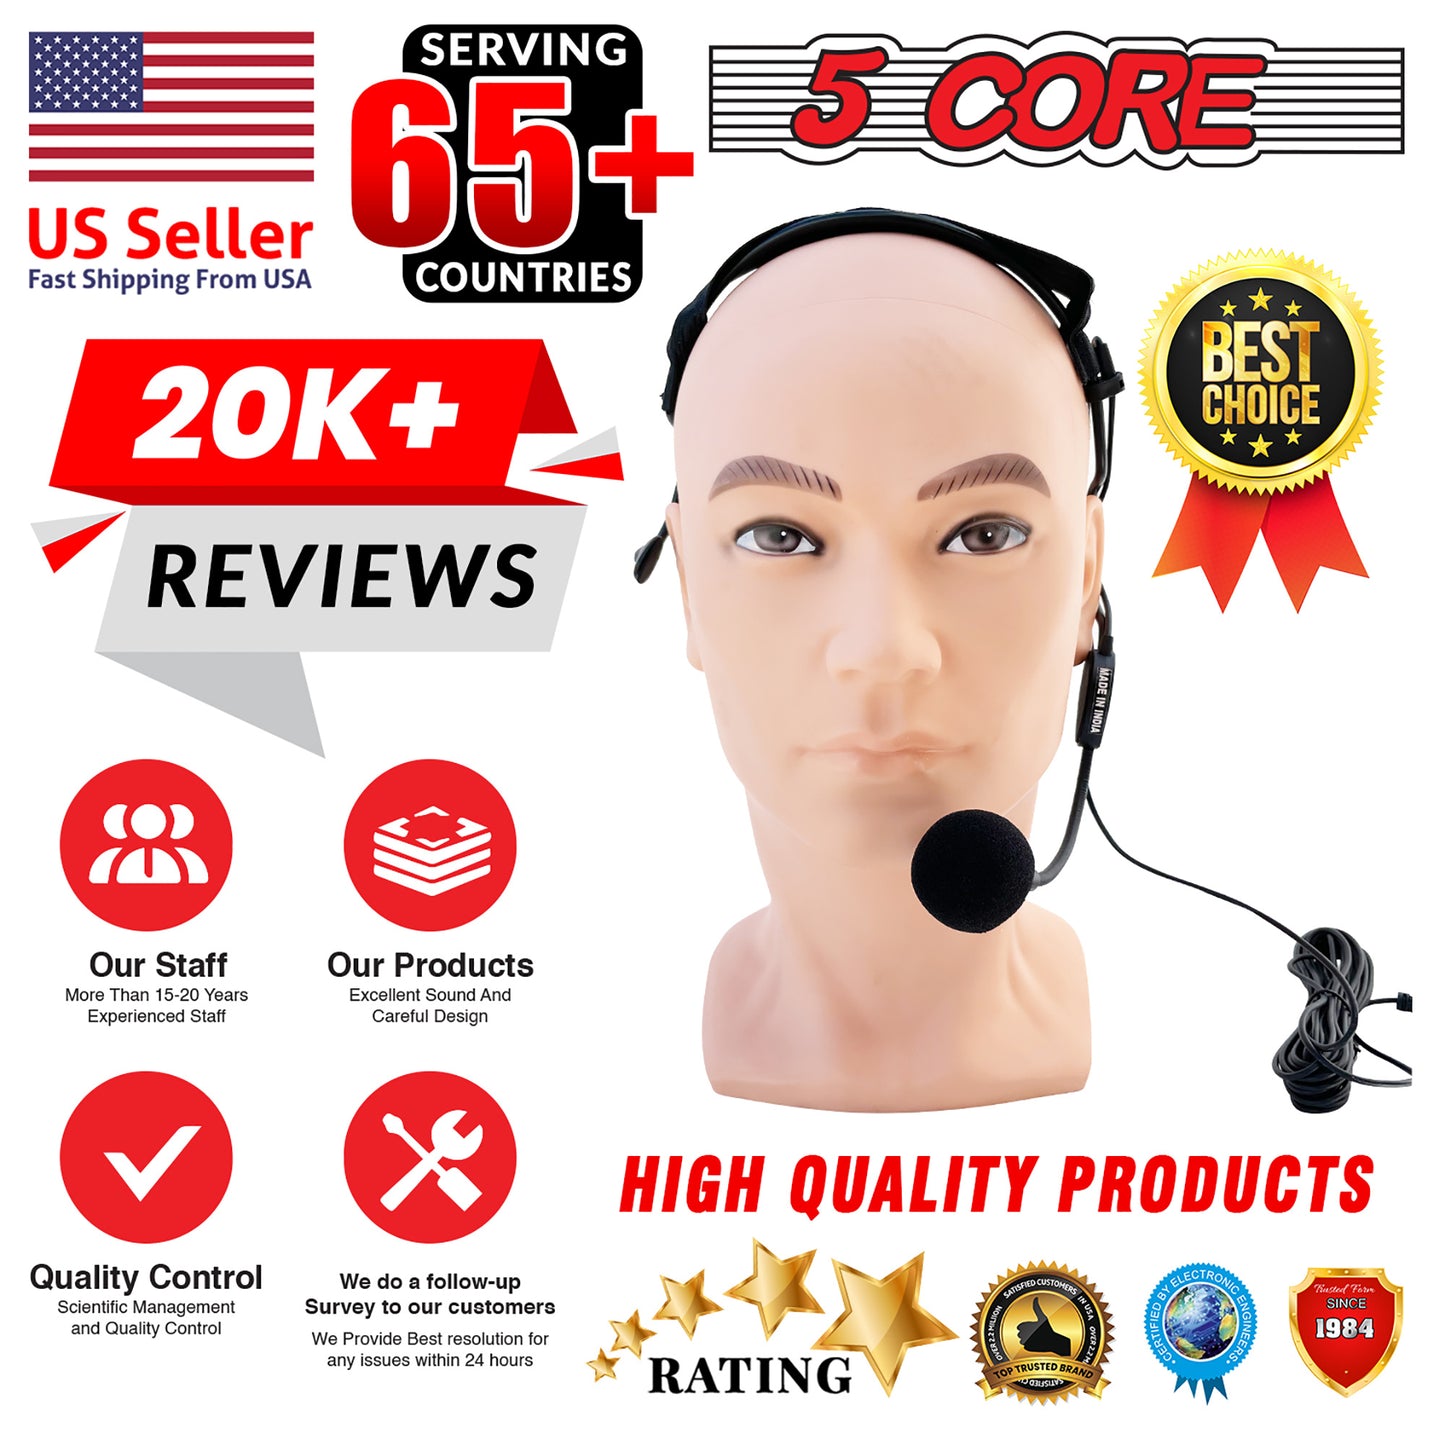 5 Core Wired Microphone Headset • w ¼ Inch Connector • Headworn Hanging Unidirectional Condenser Mic • Flexible Boom for Voice Amplifier • for Speaking Teachers Presentations- MIC HM 01